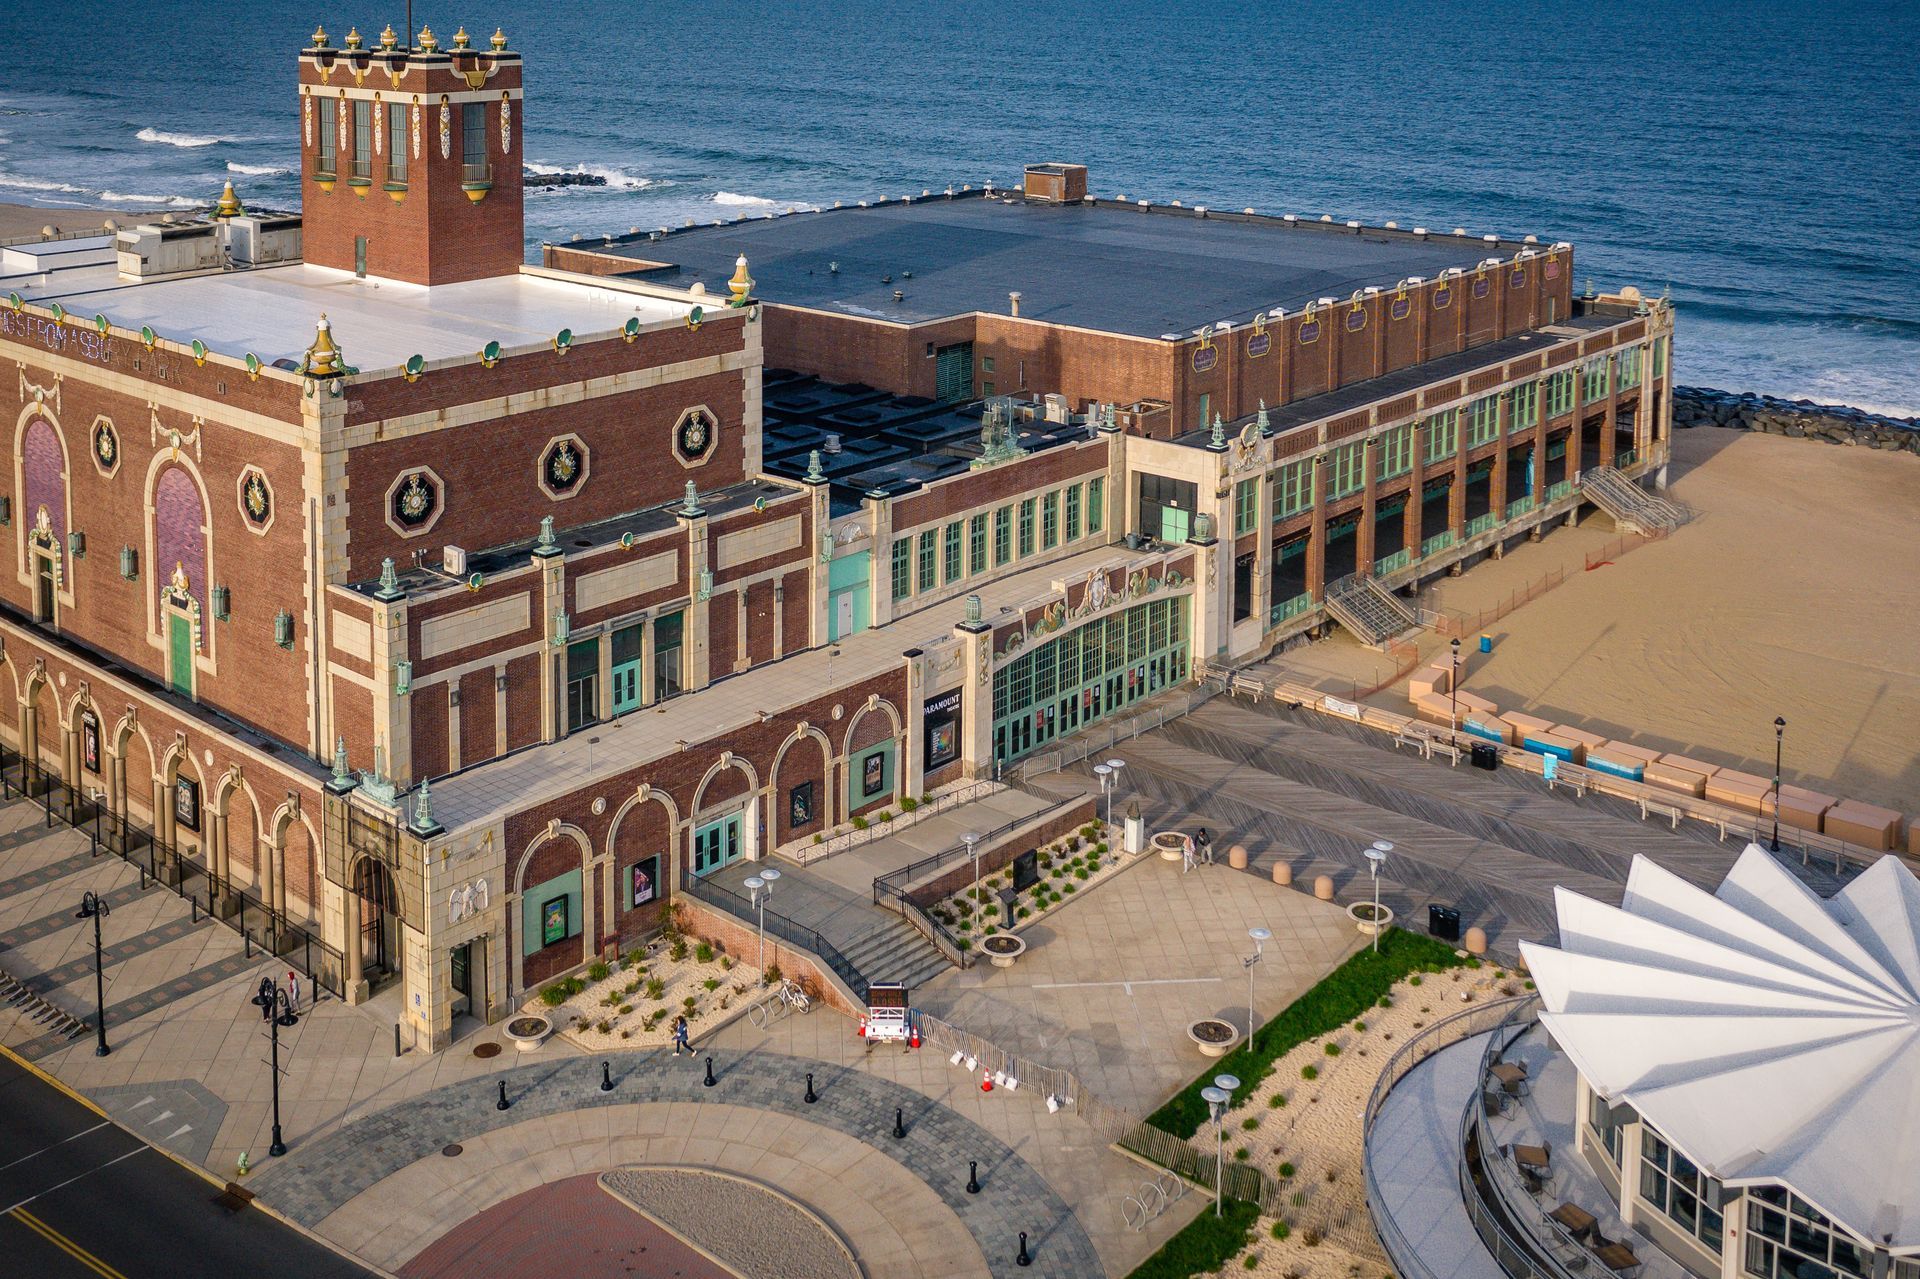 An aerial view of a large brick building next to the ocean.